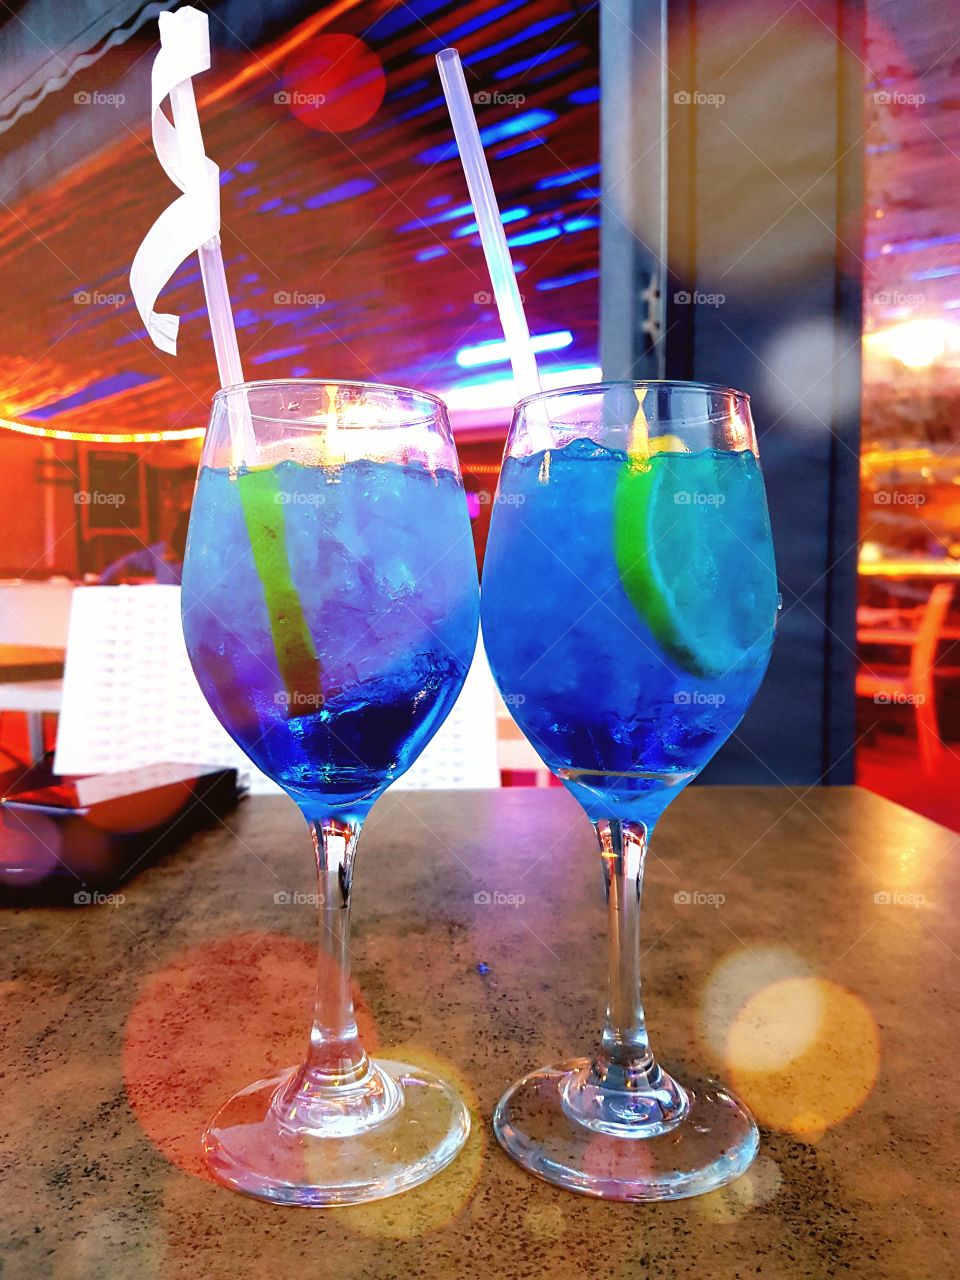 Blue Cocktails at night